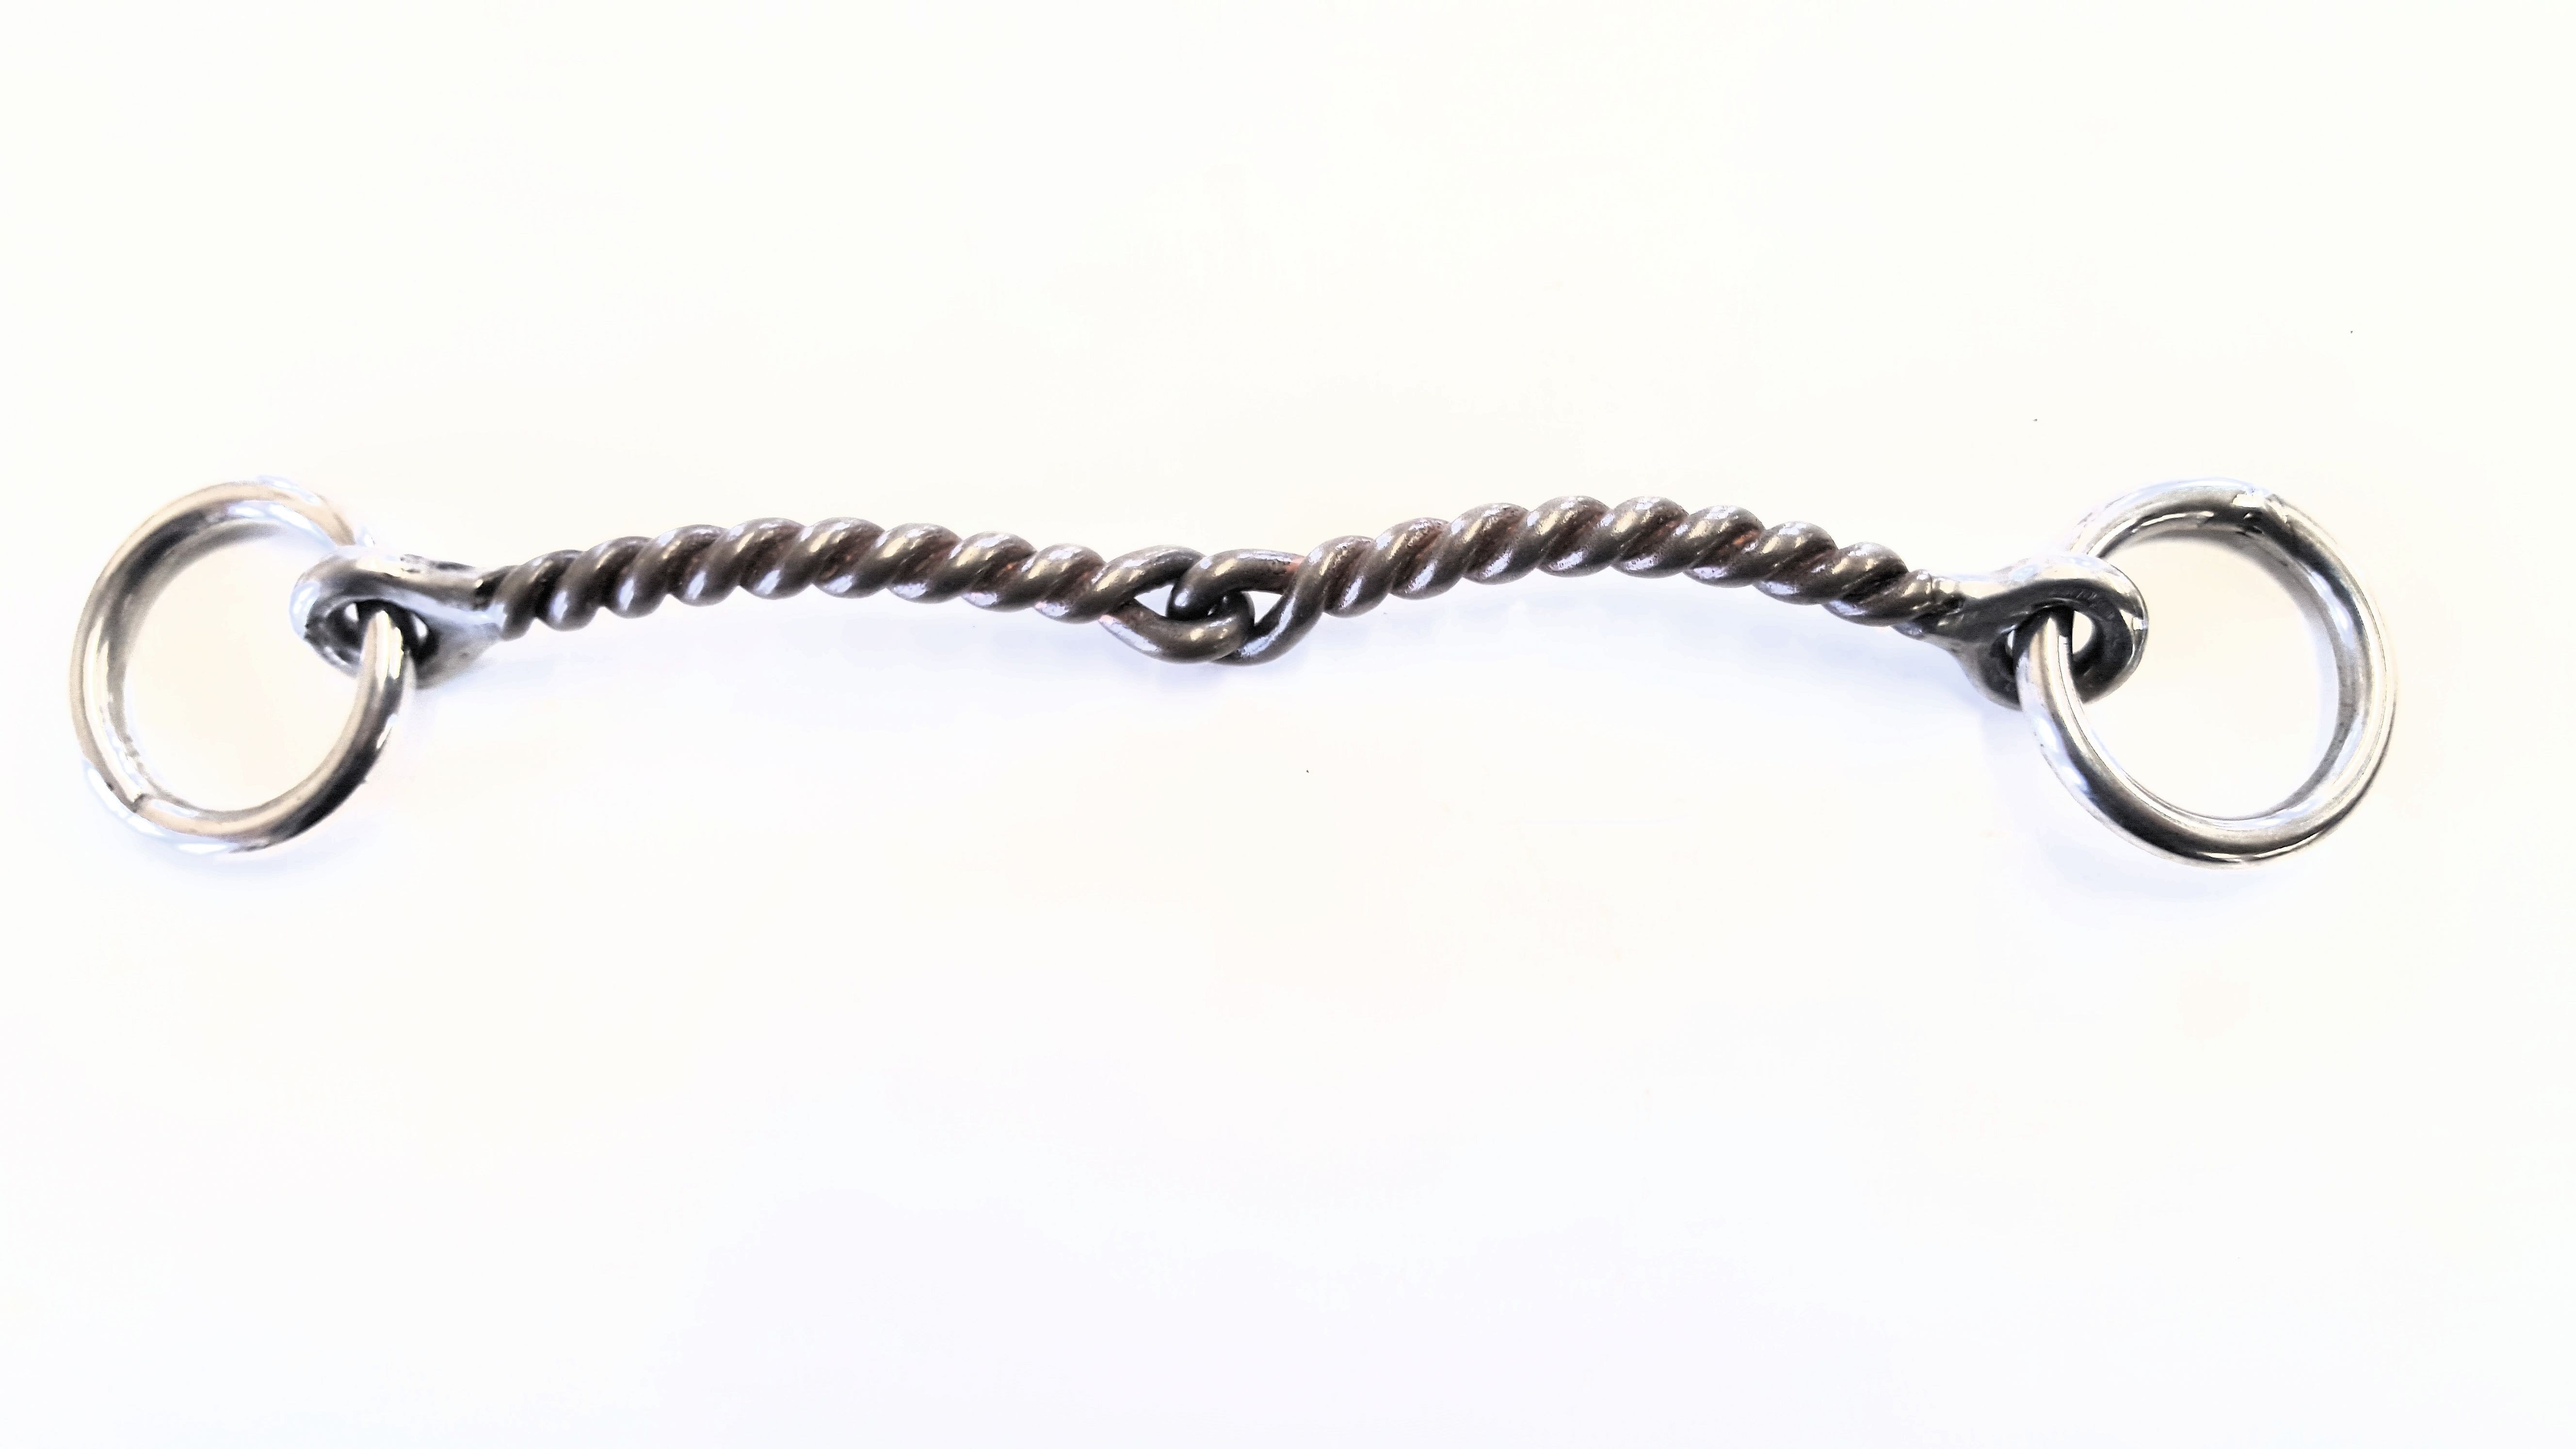 1/4" Twisted Wire Snaffle   1 1/4" Rings